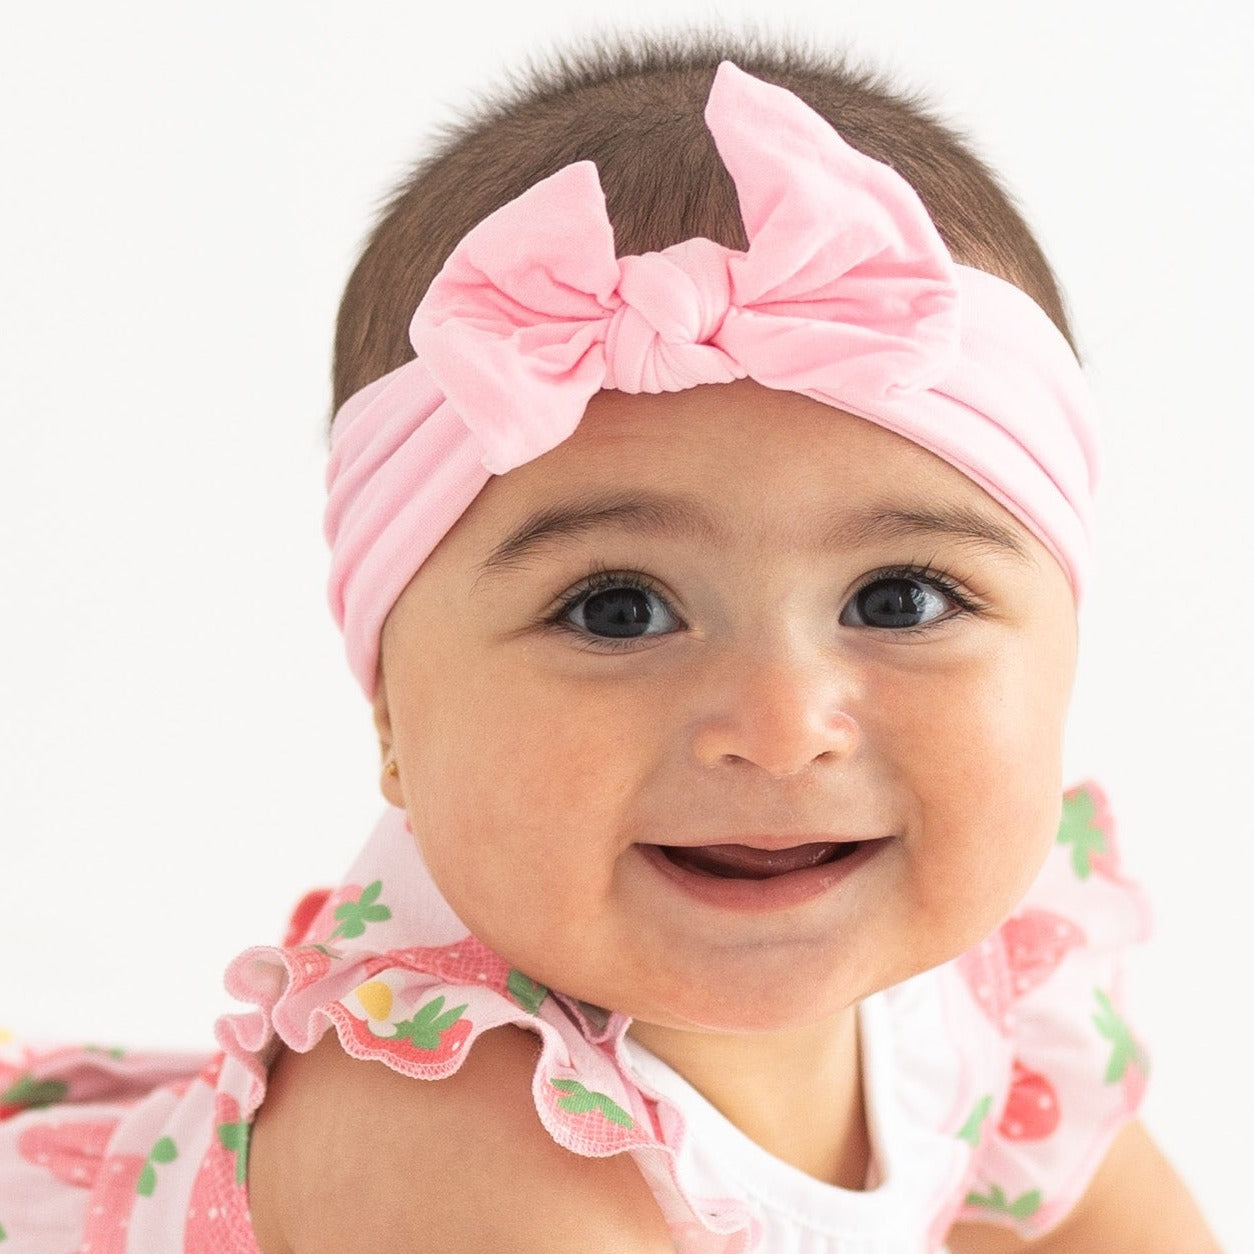 Wide Headband with Knot Bow - Powder Pink